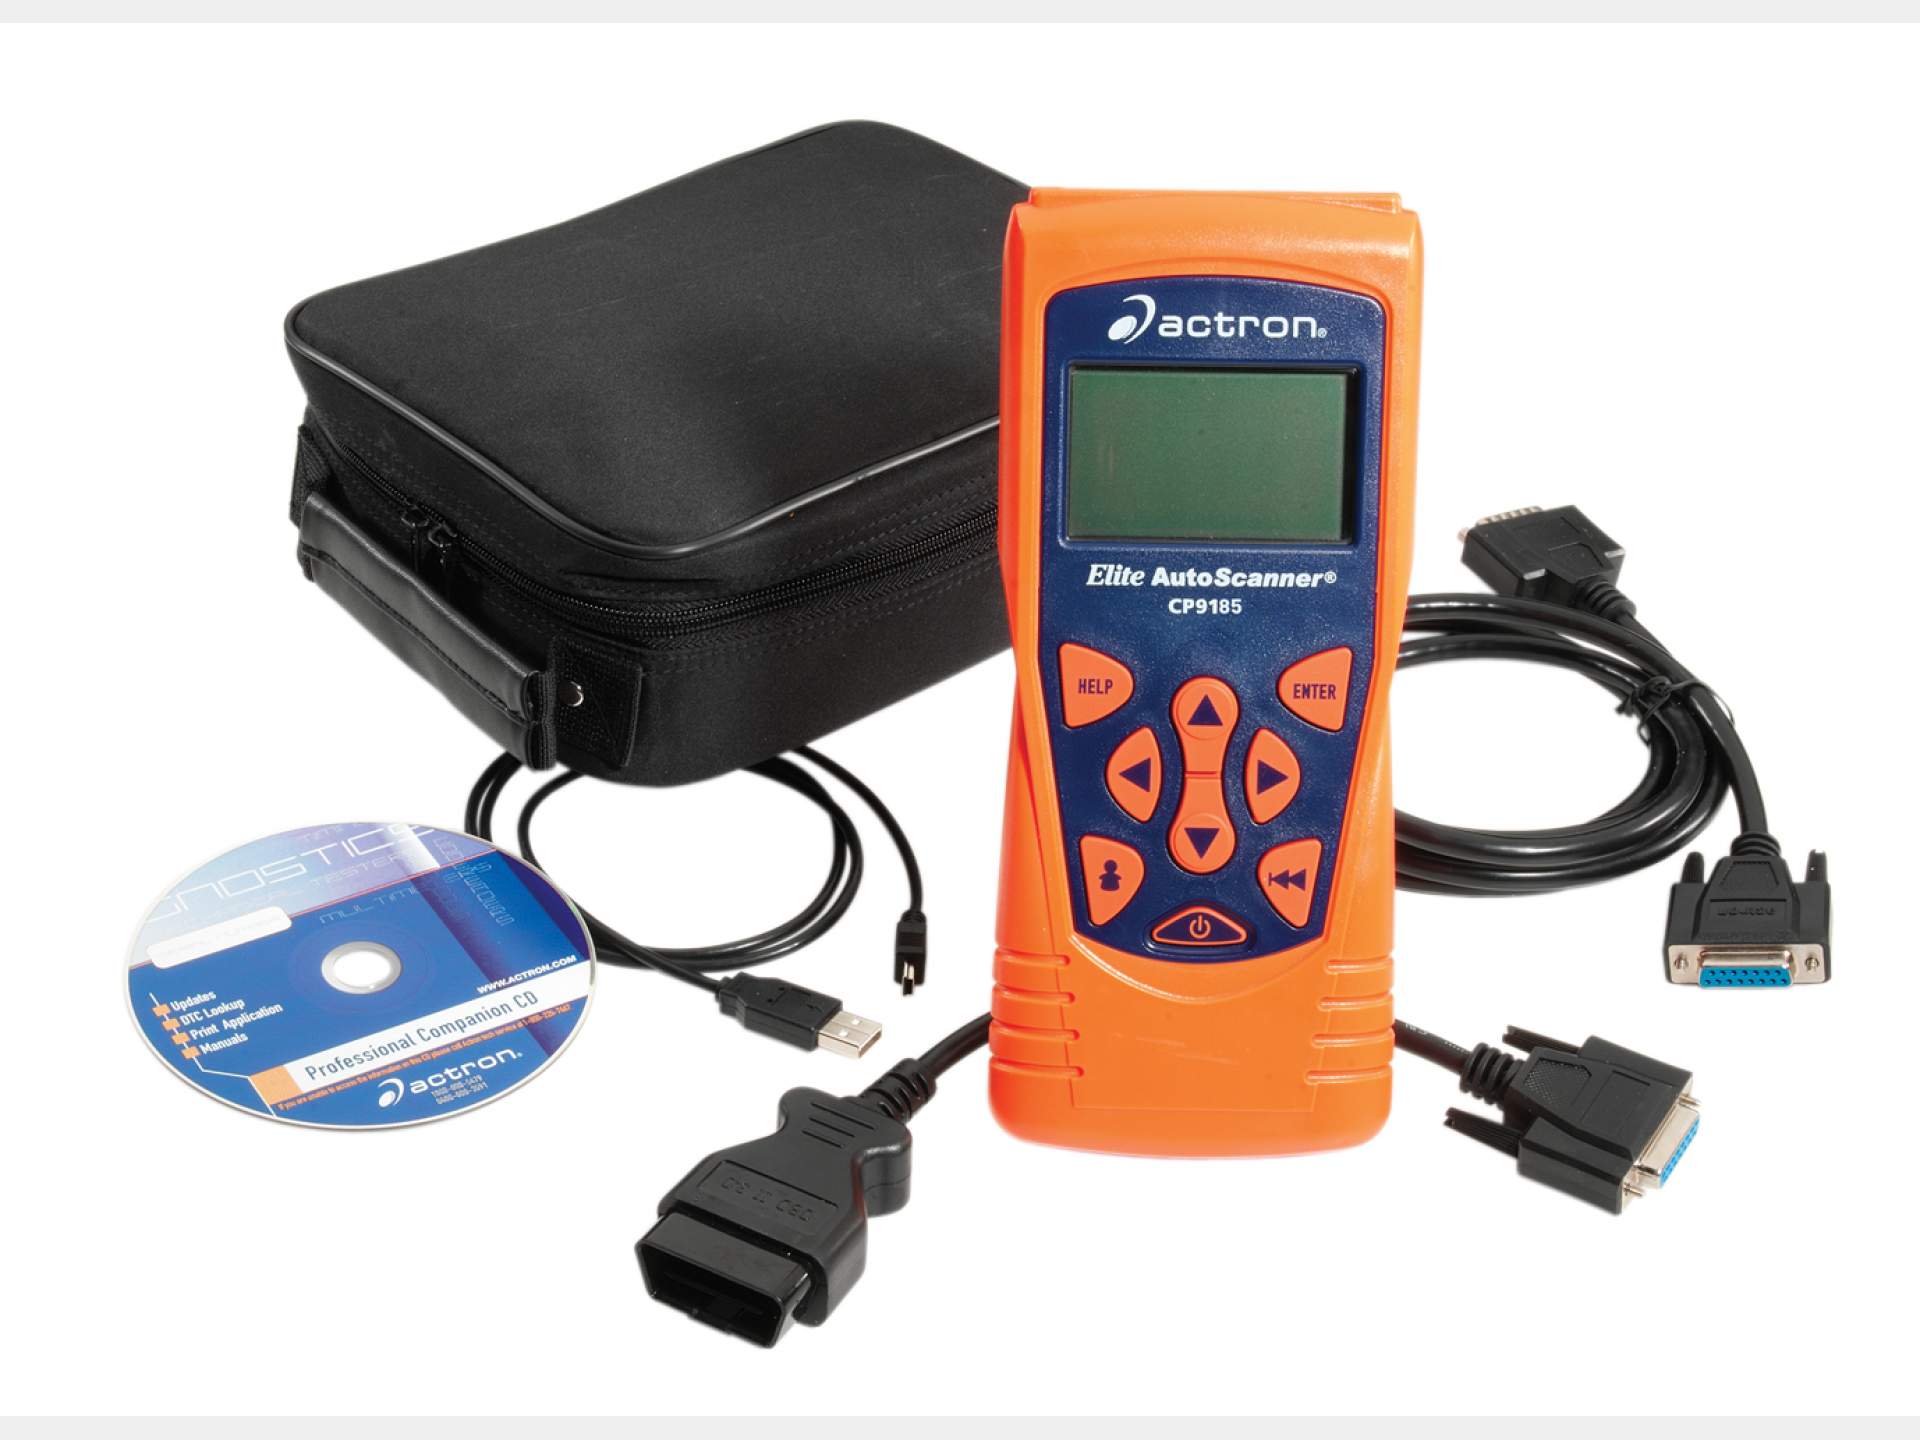 How To Use An Actron Auto Scanner